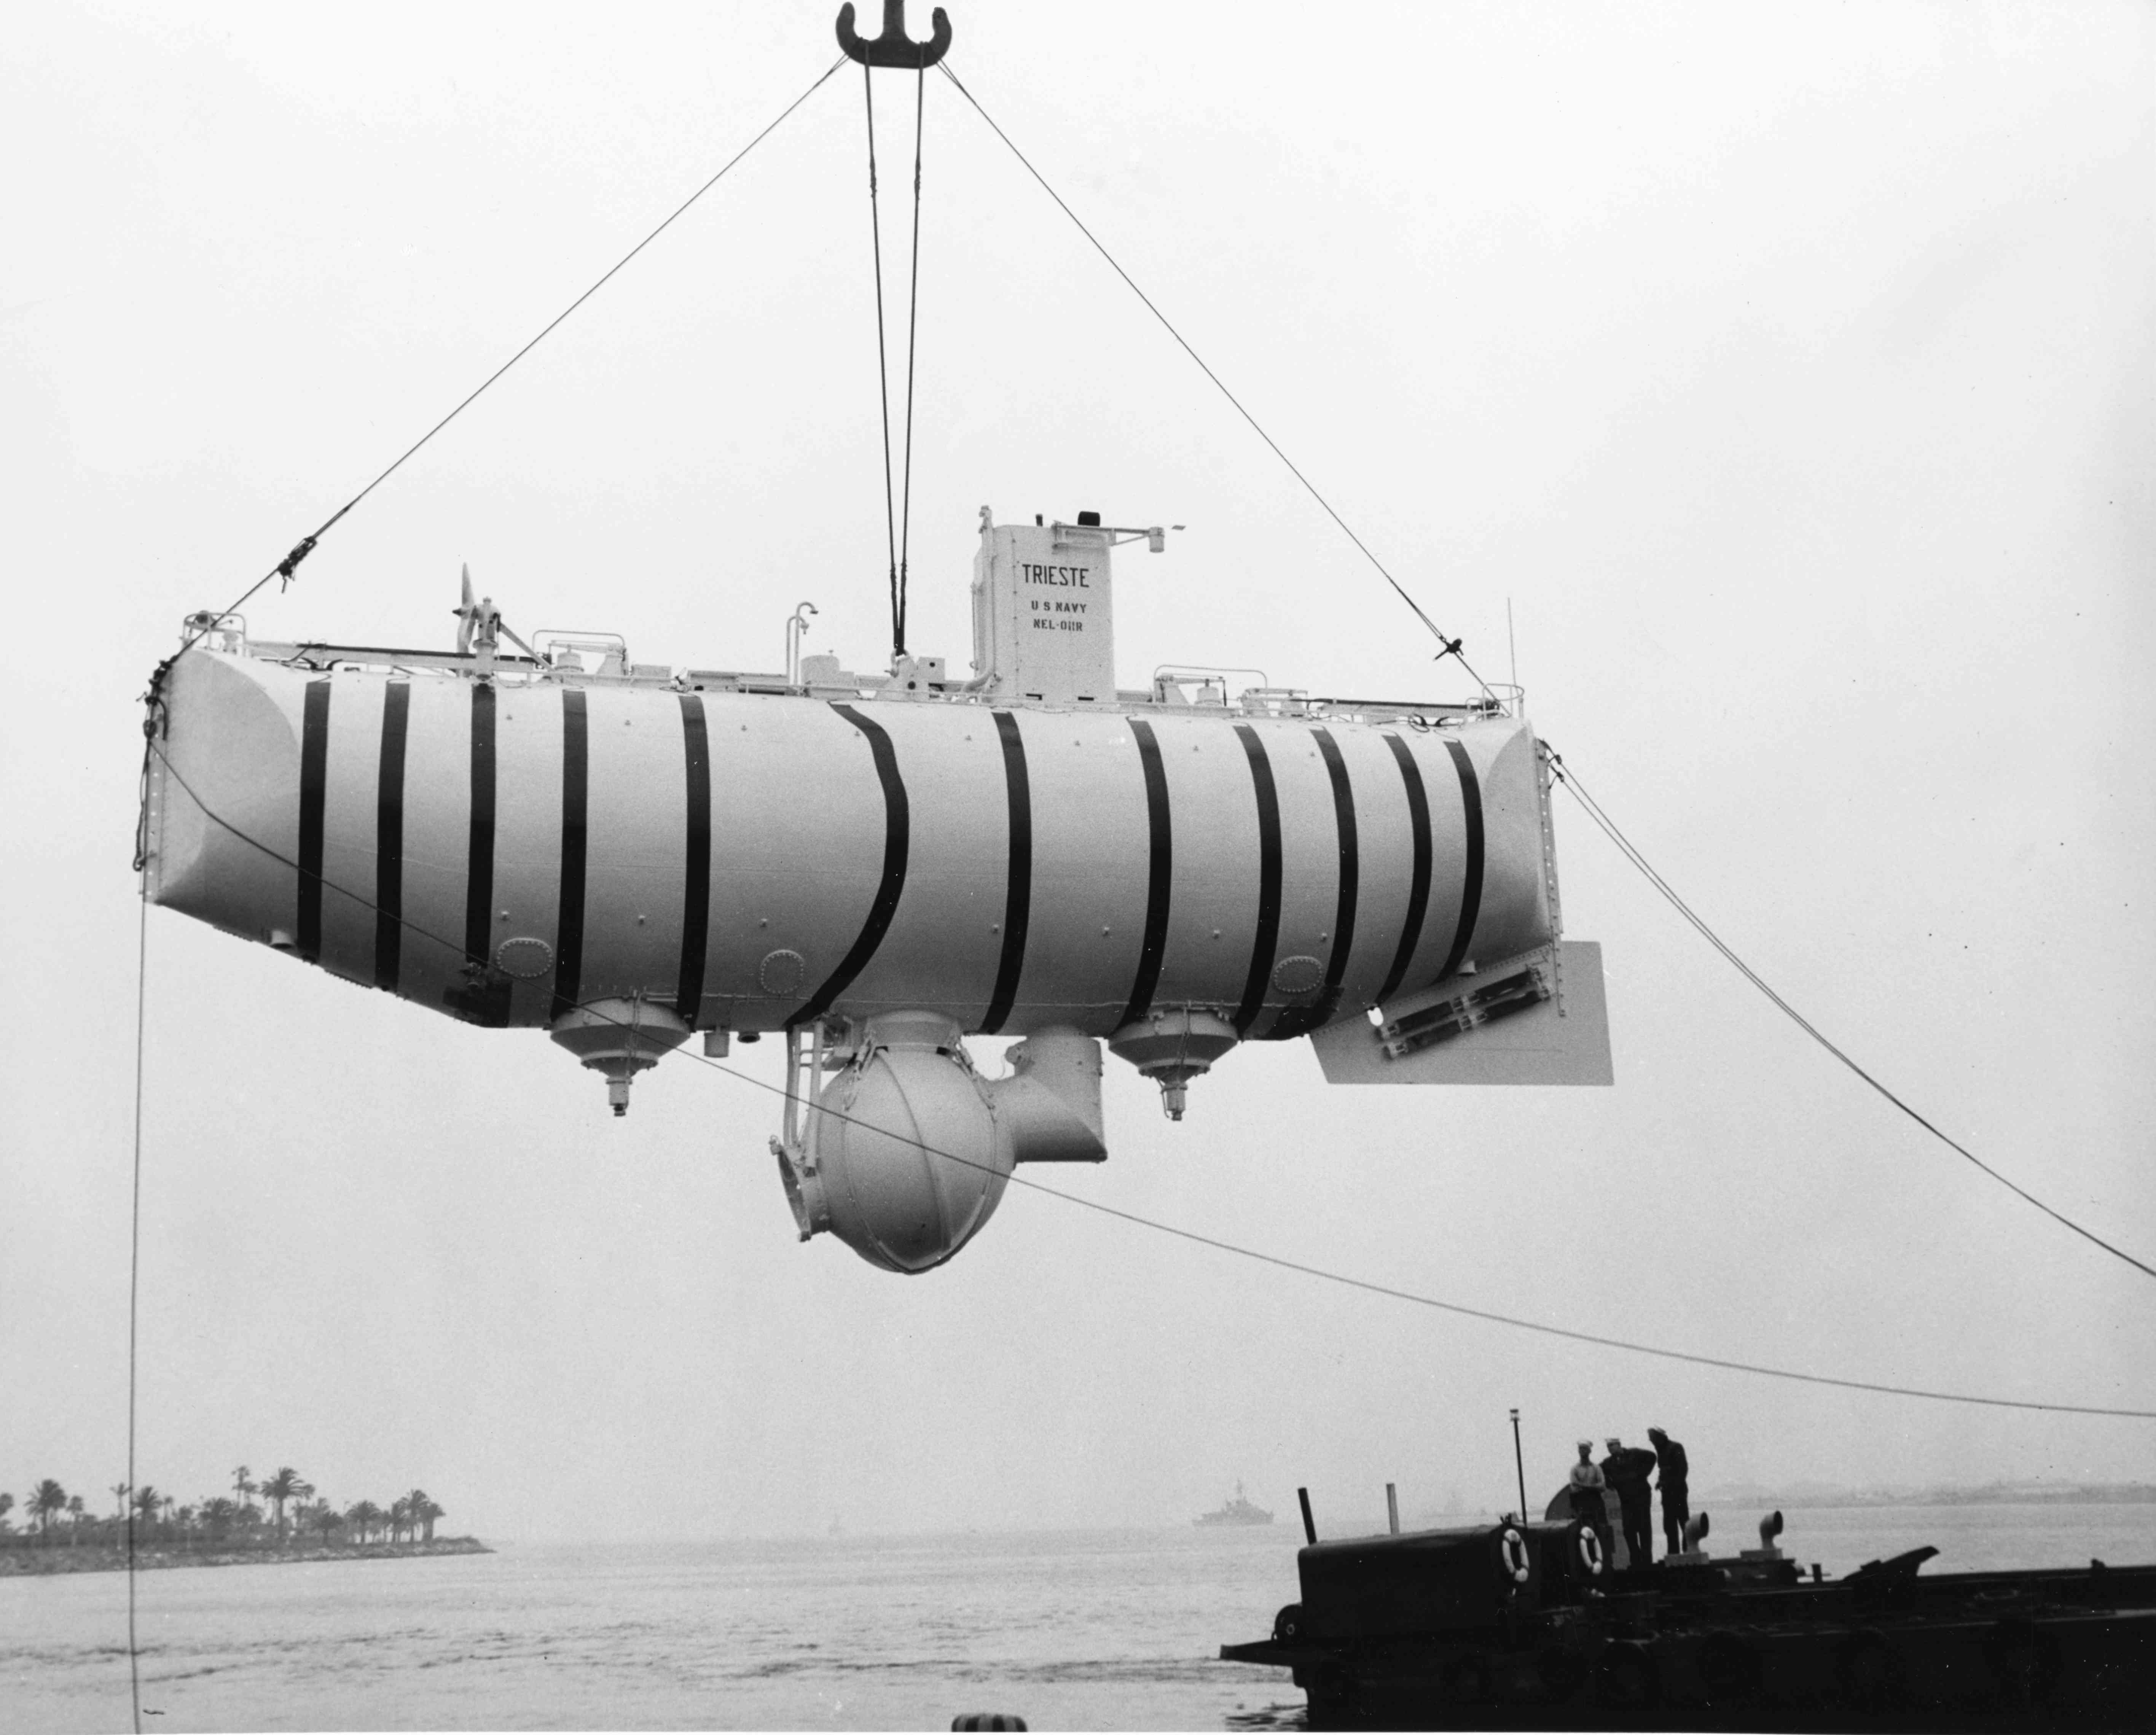 The bathyscaphe Trieste (designed by Auguste Piccard), the first crewed vehicle to reach the bottom of the Mariana Trench.